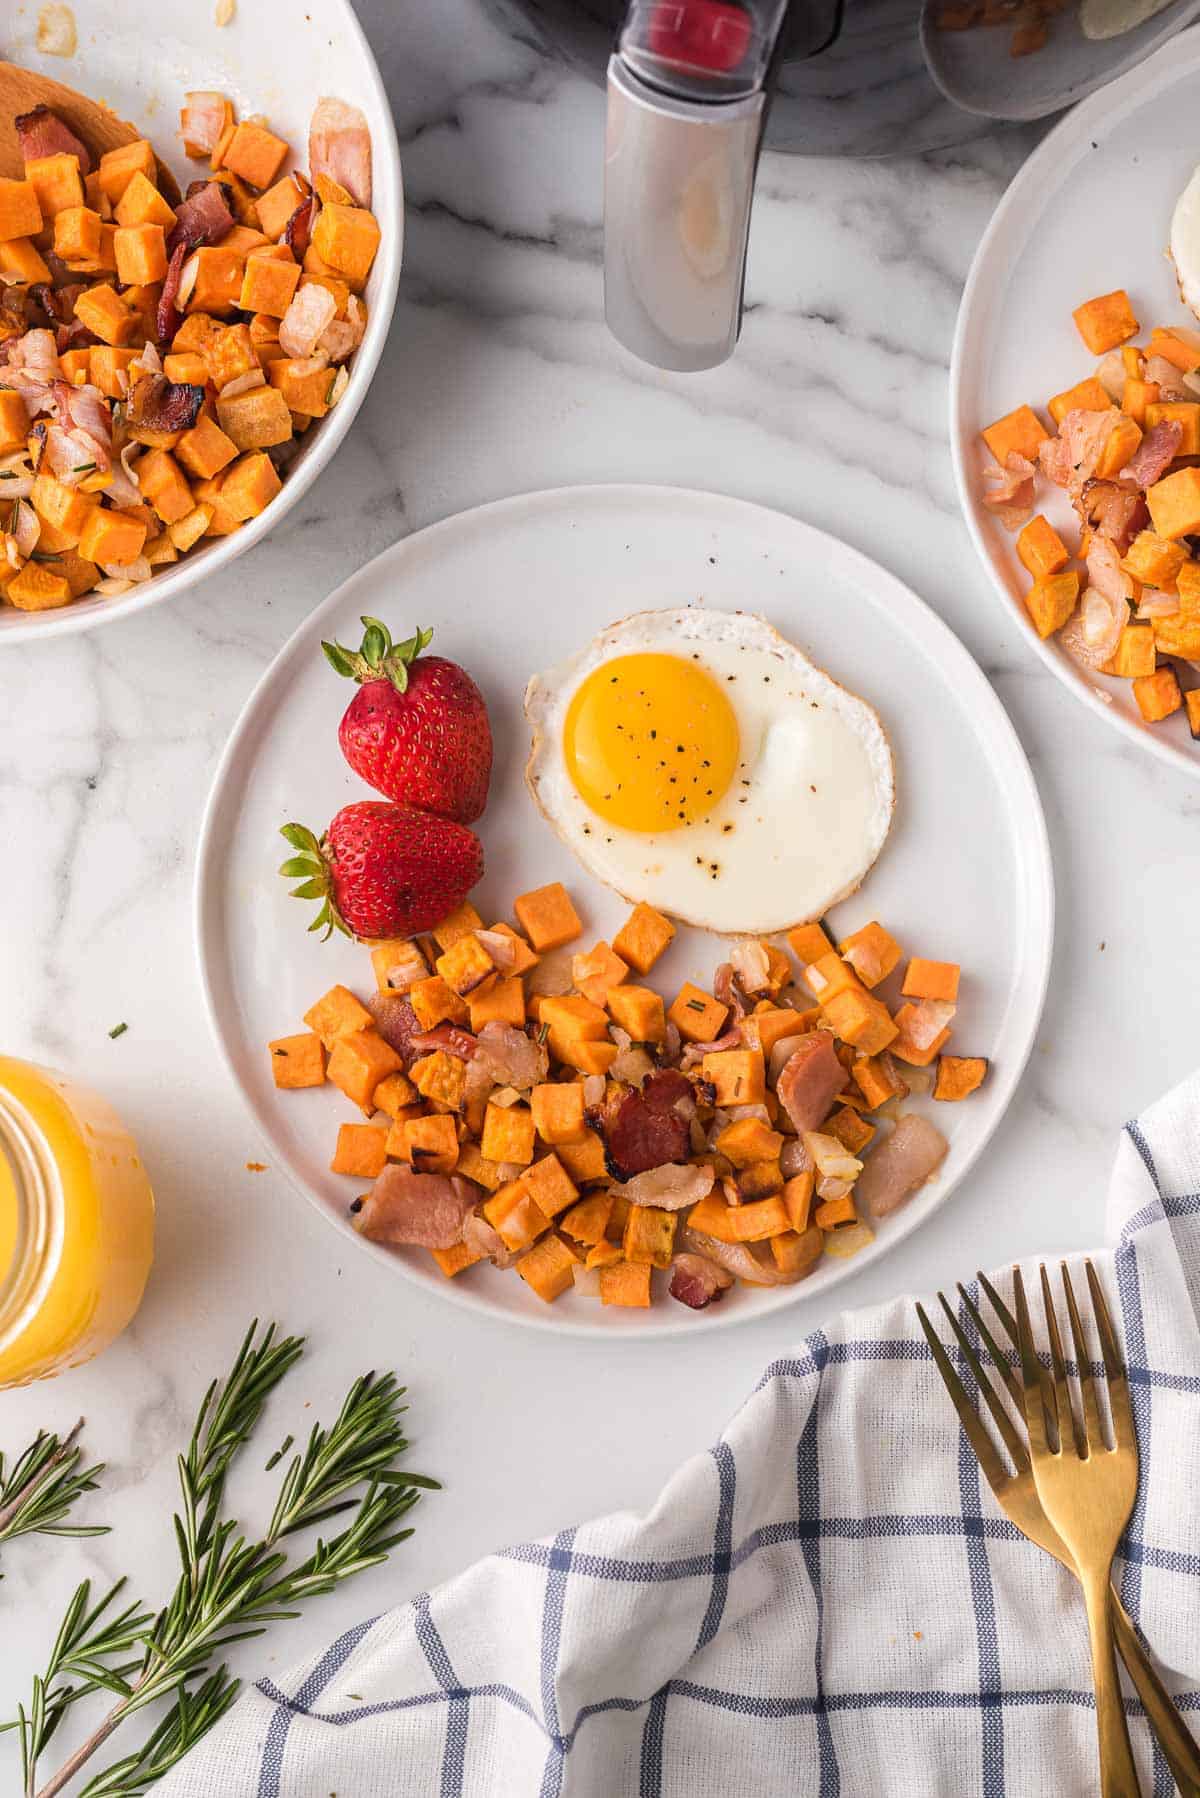 Plate of sweet potato hash, a fried egg, and whole strawberries.